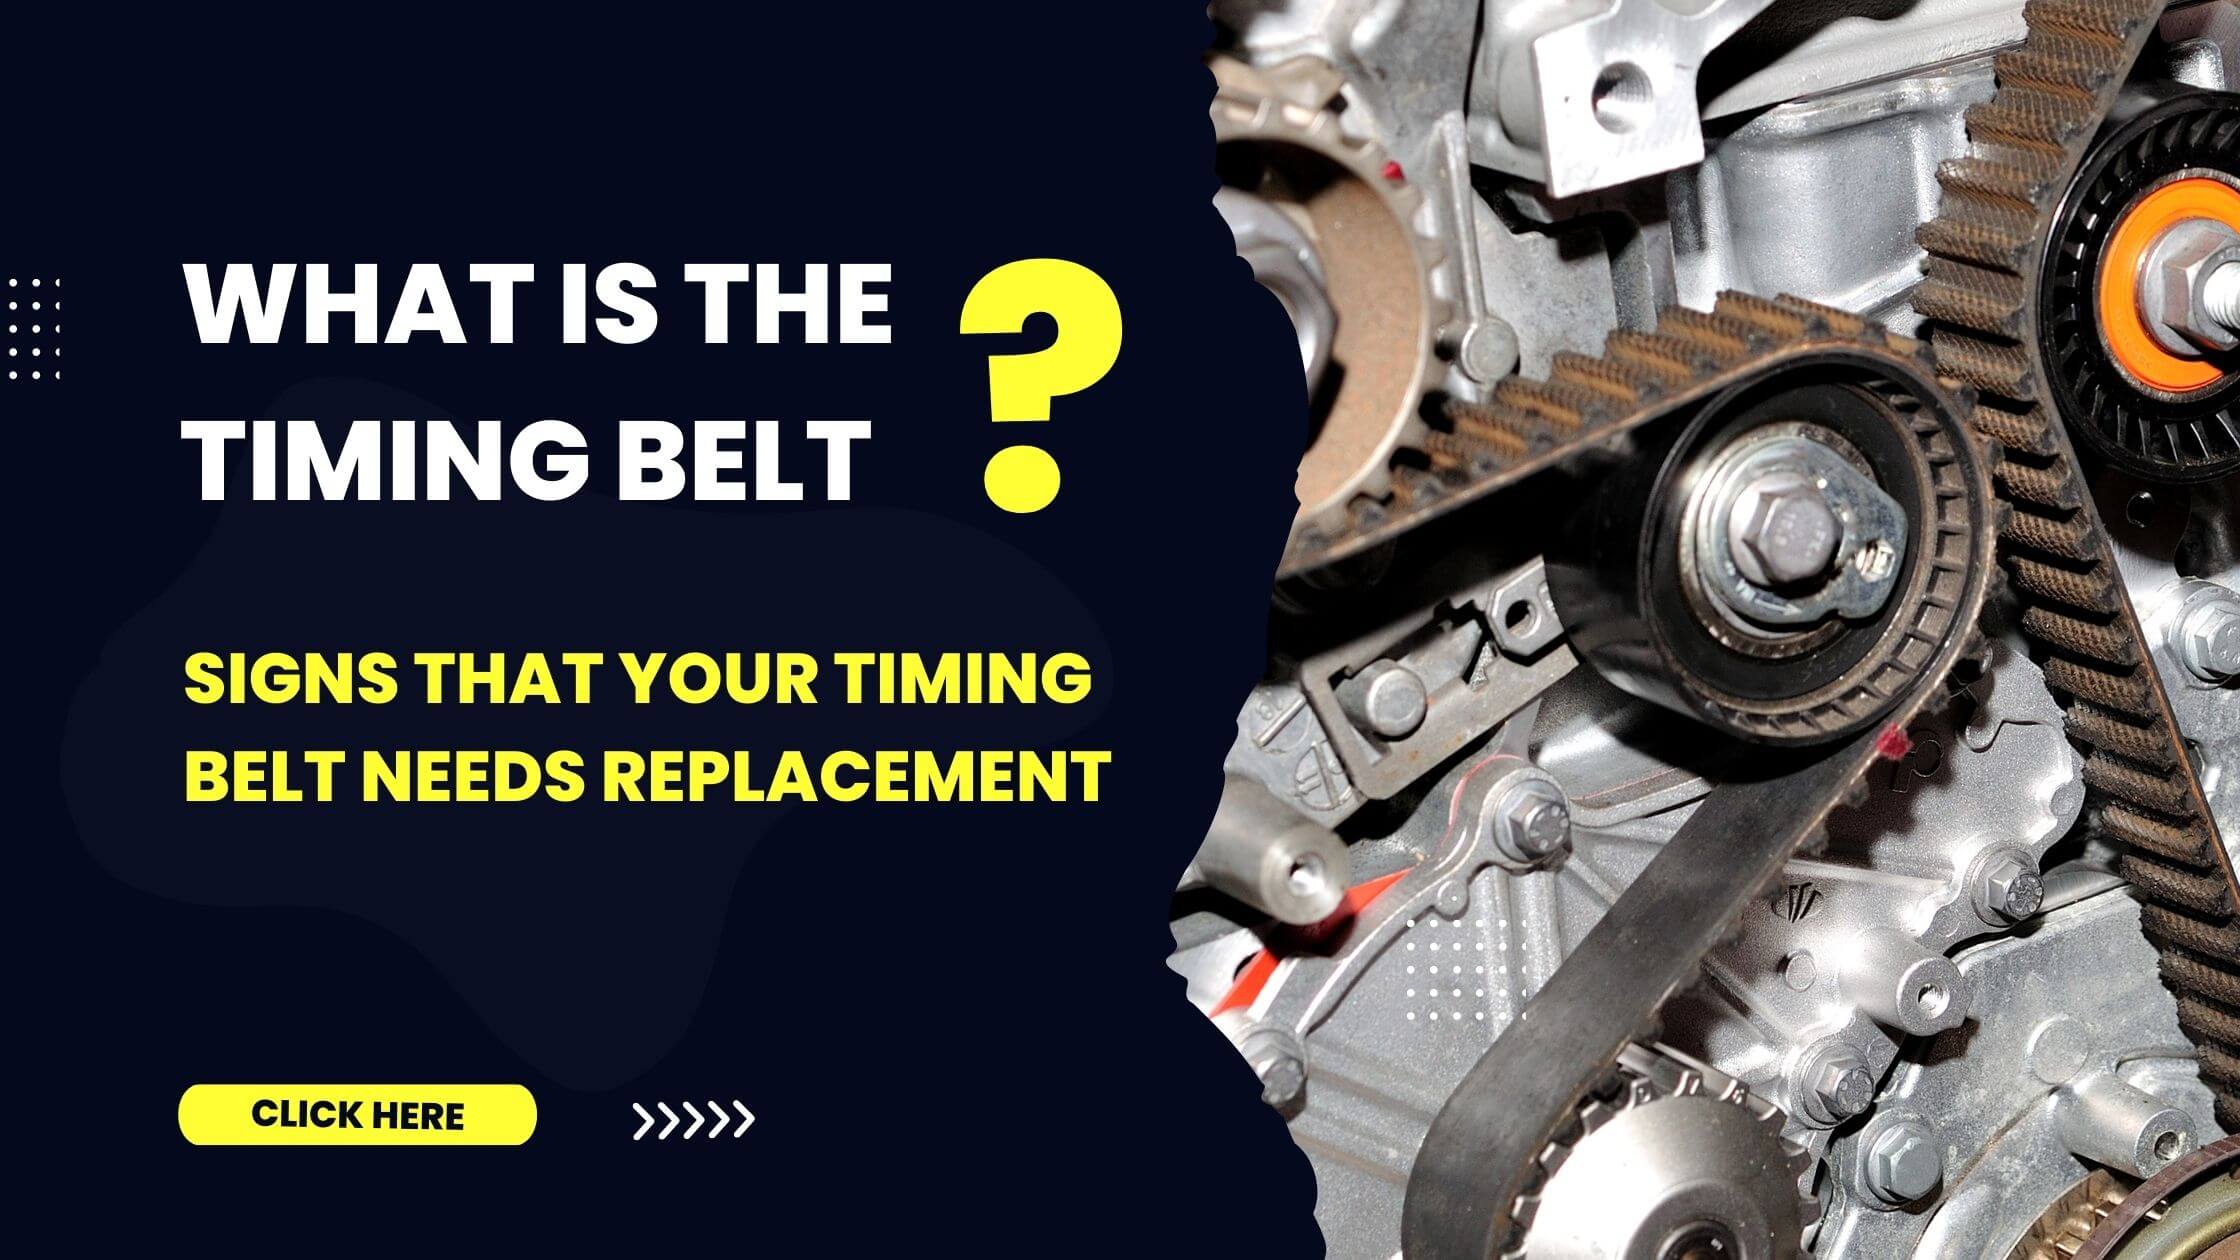 What is the timing belt – Signs that your timing belt needs replacement